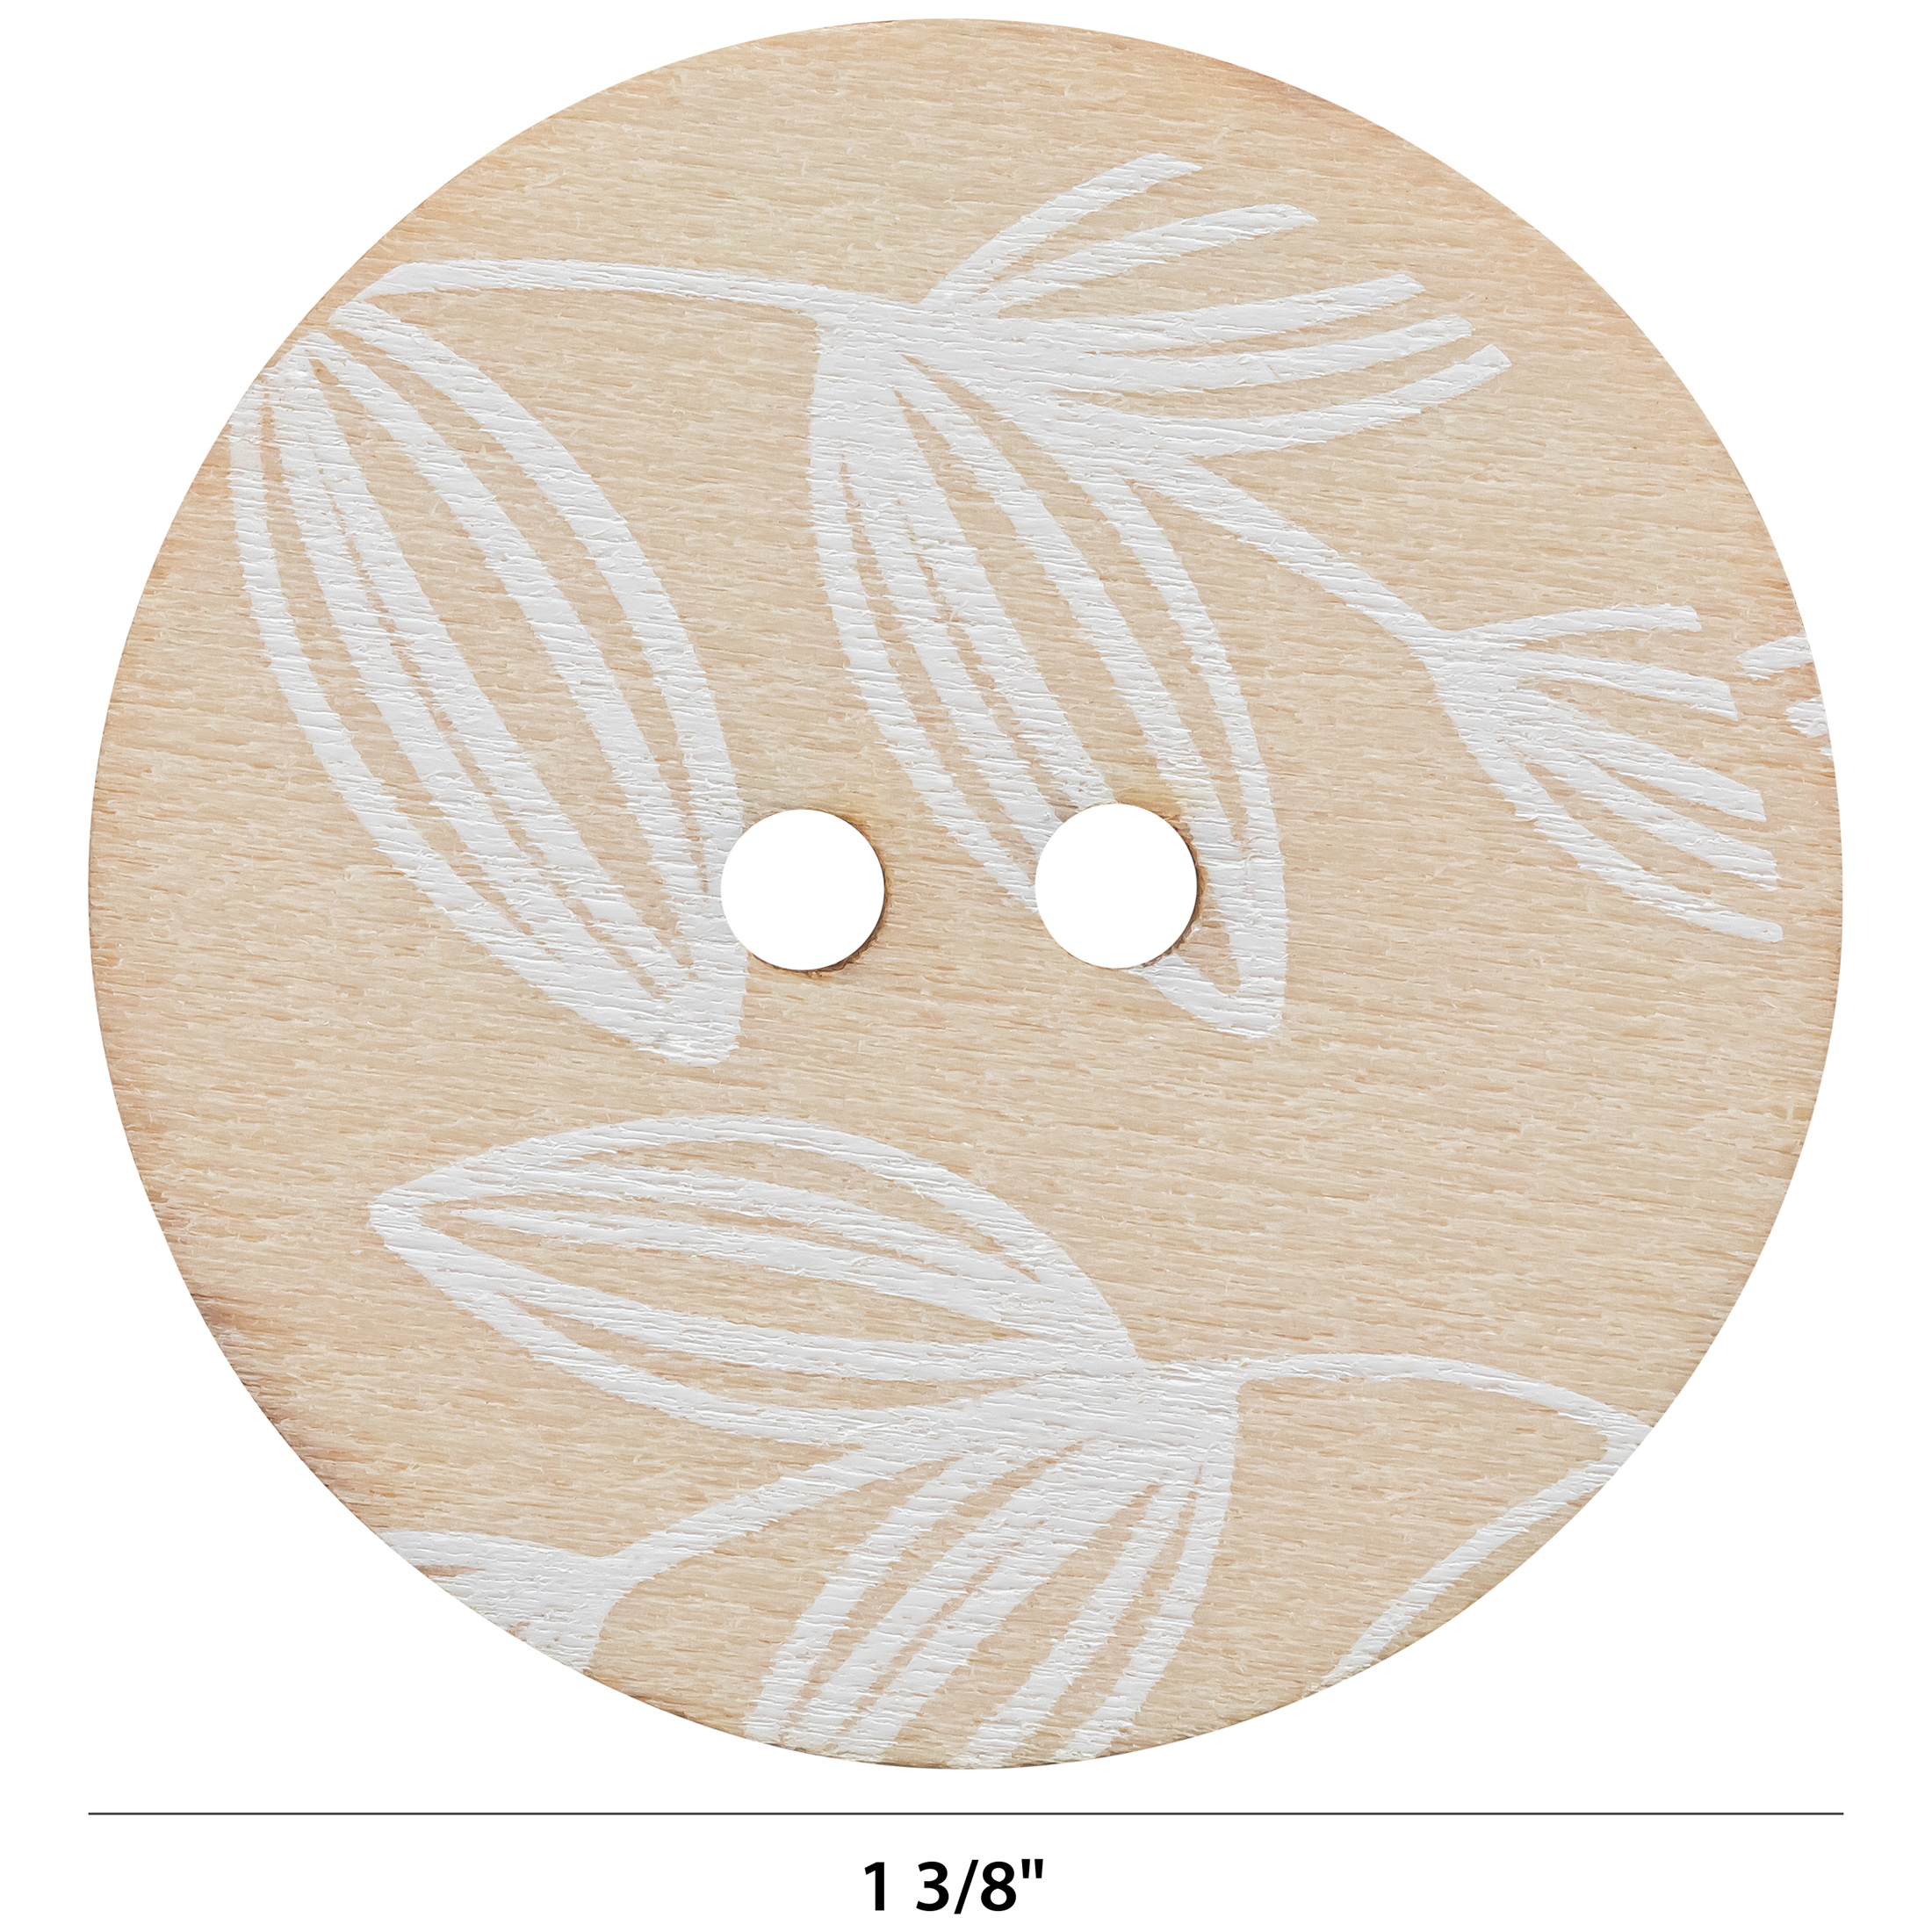 Organic Elements Tan 1 3/8" Wood Floral Printed 2-Hole Buttons, 8 Pieces - image 4 of 6